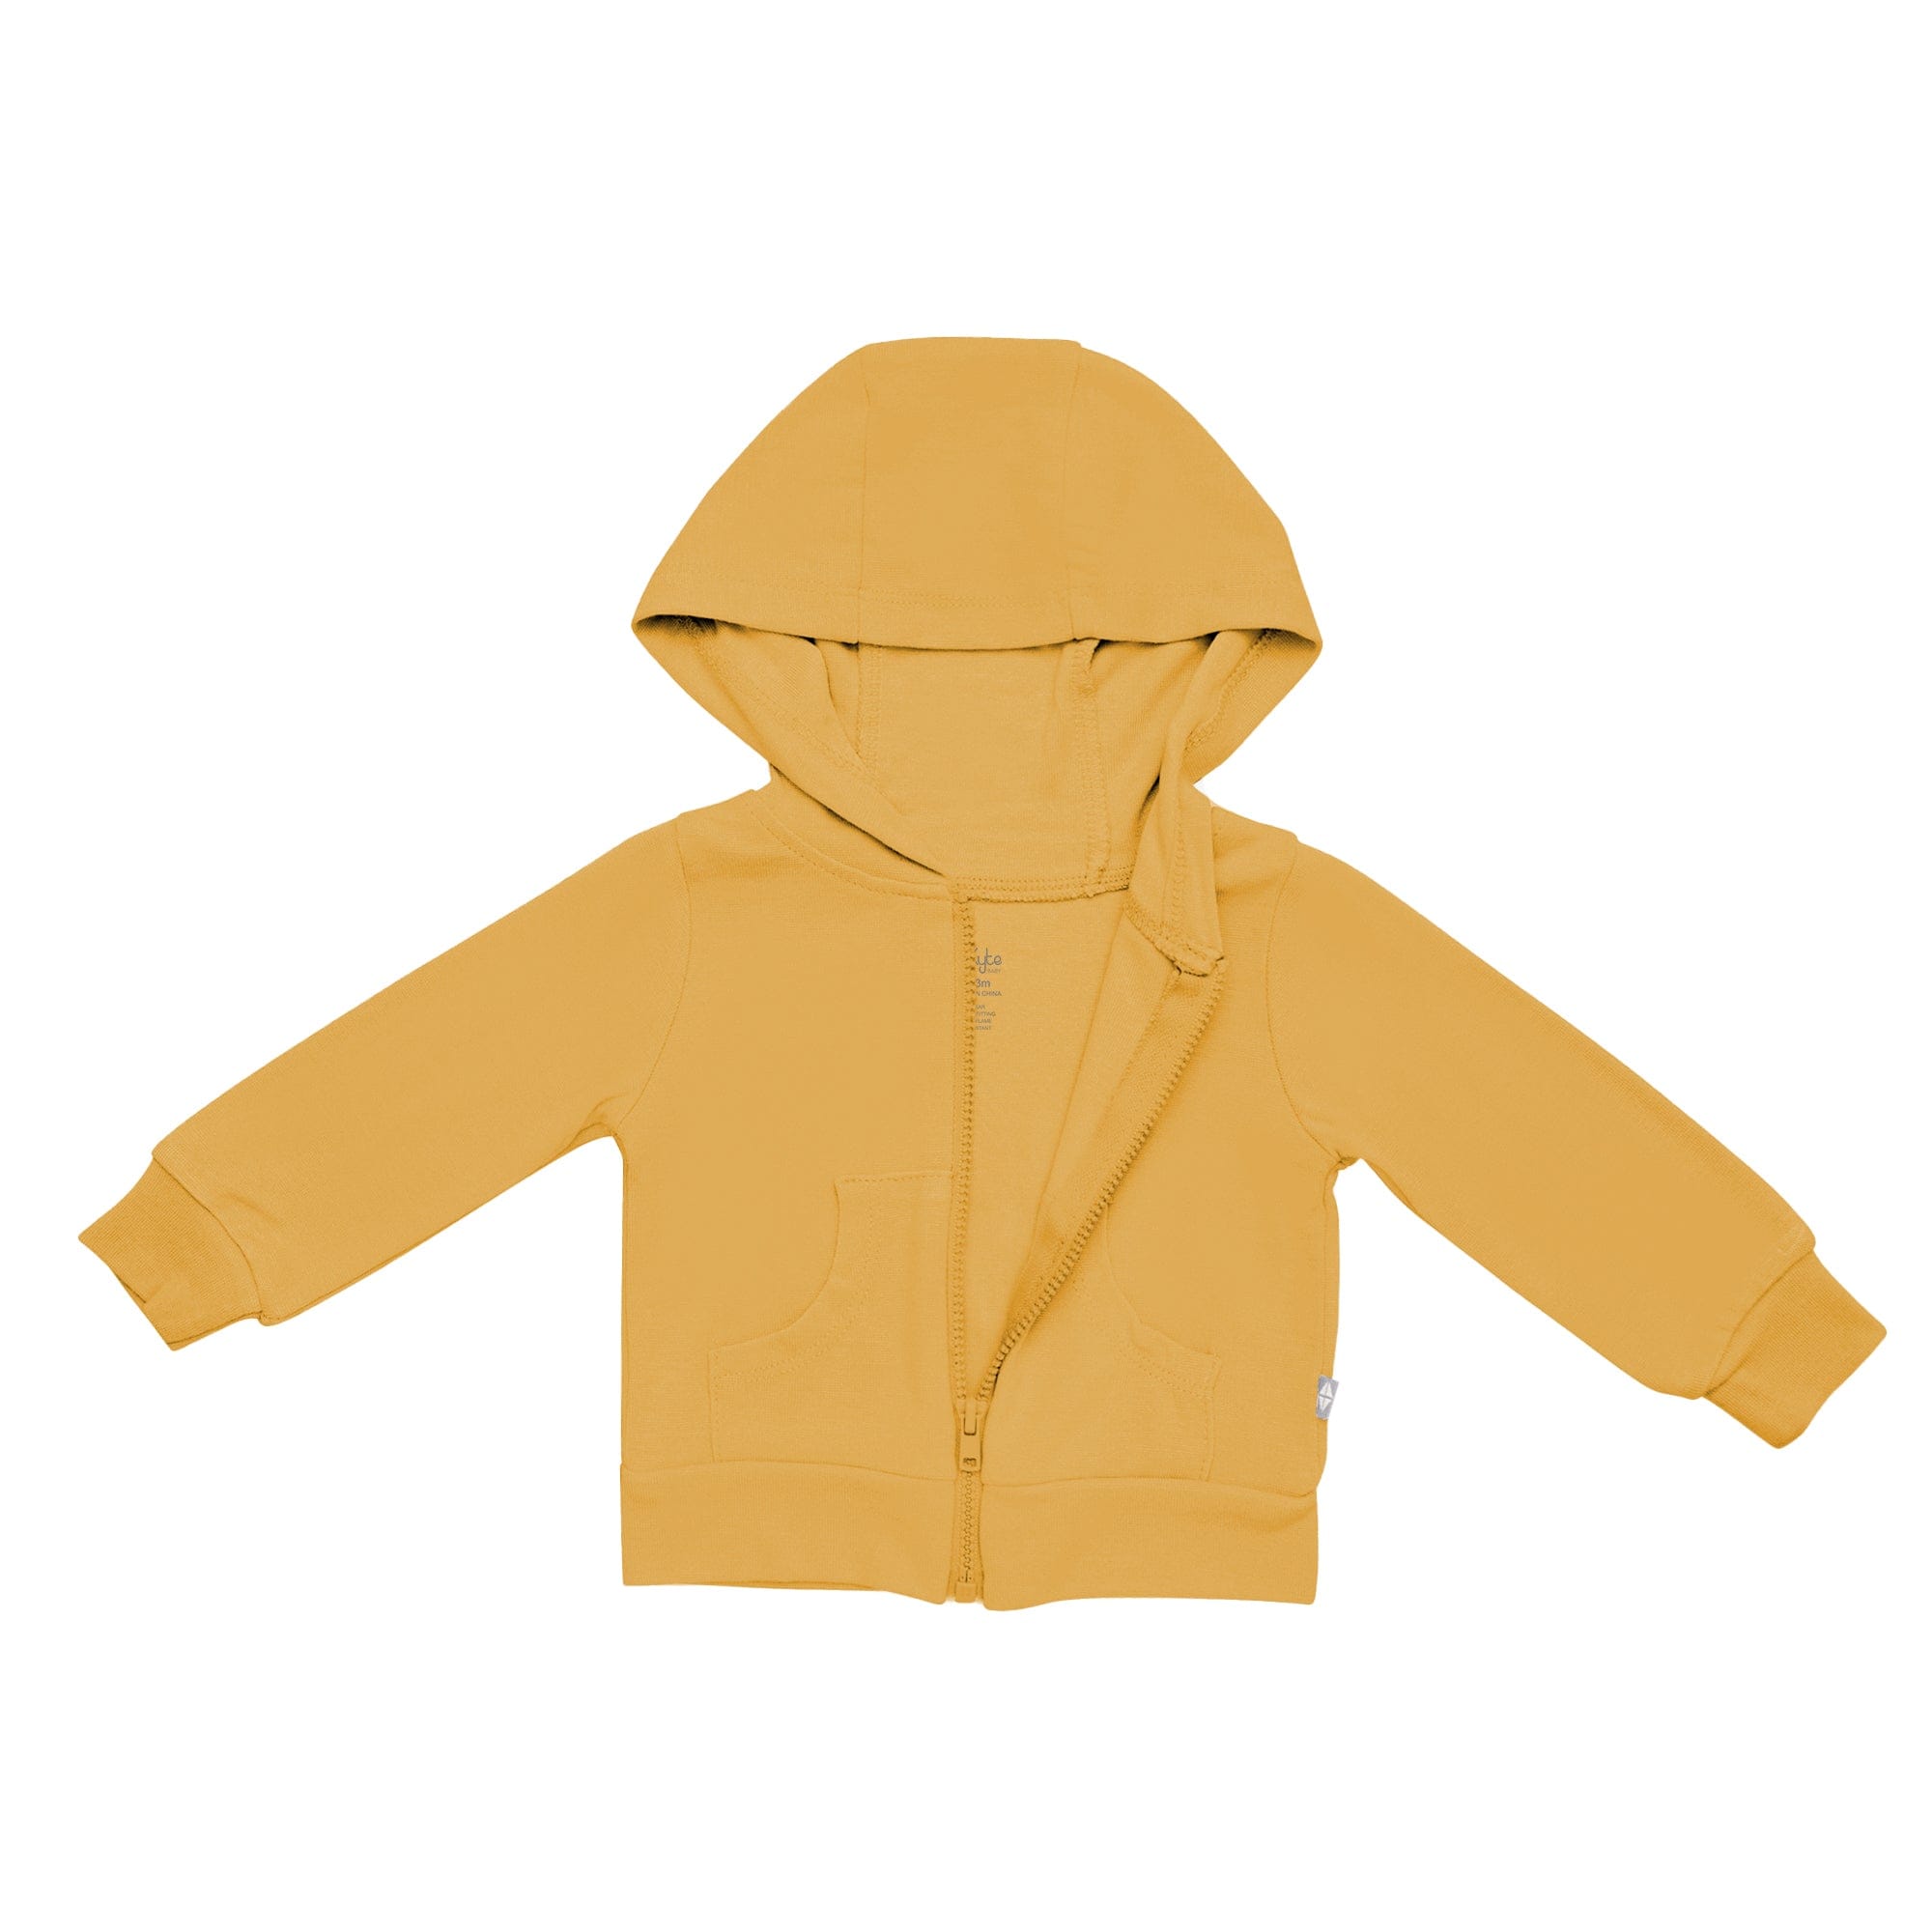 Kyte BABY Hooded Jacket Bamboo Jersey Hooded Jacket in Marigold